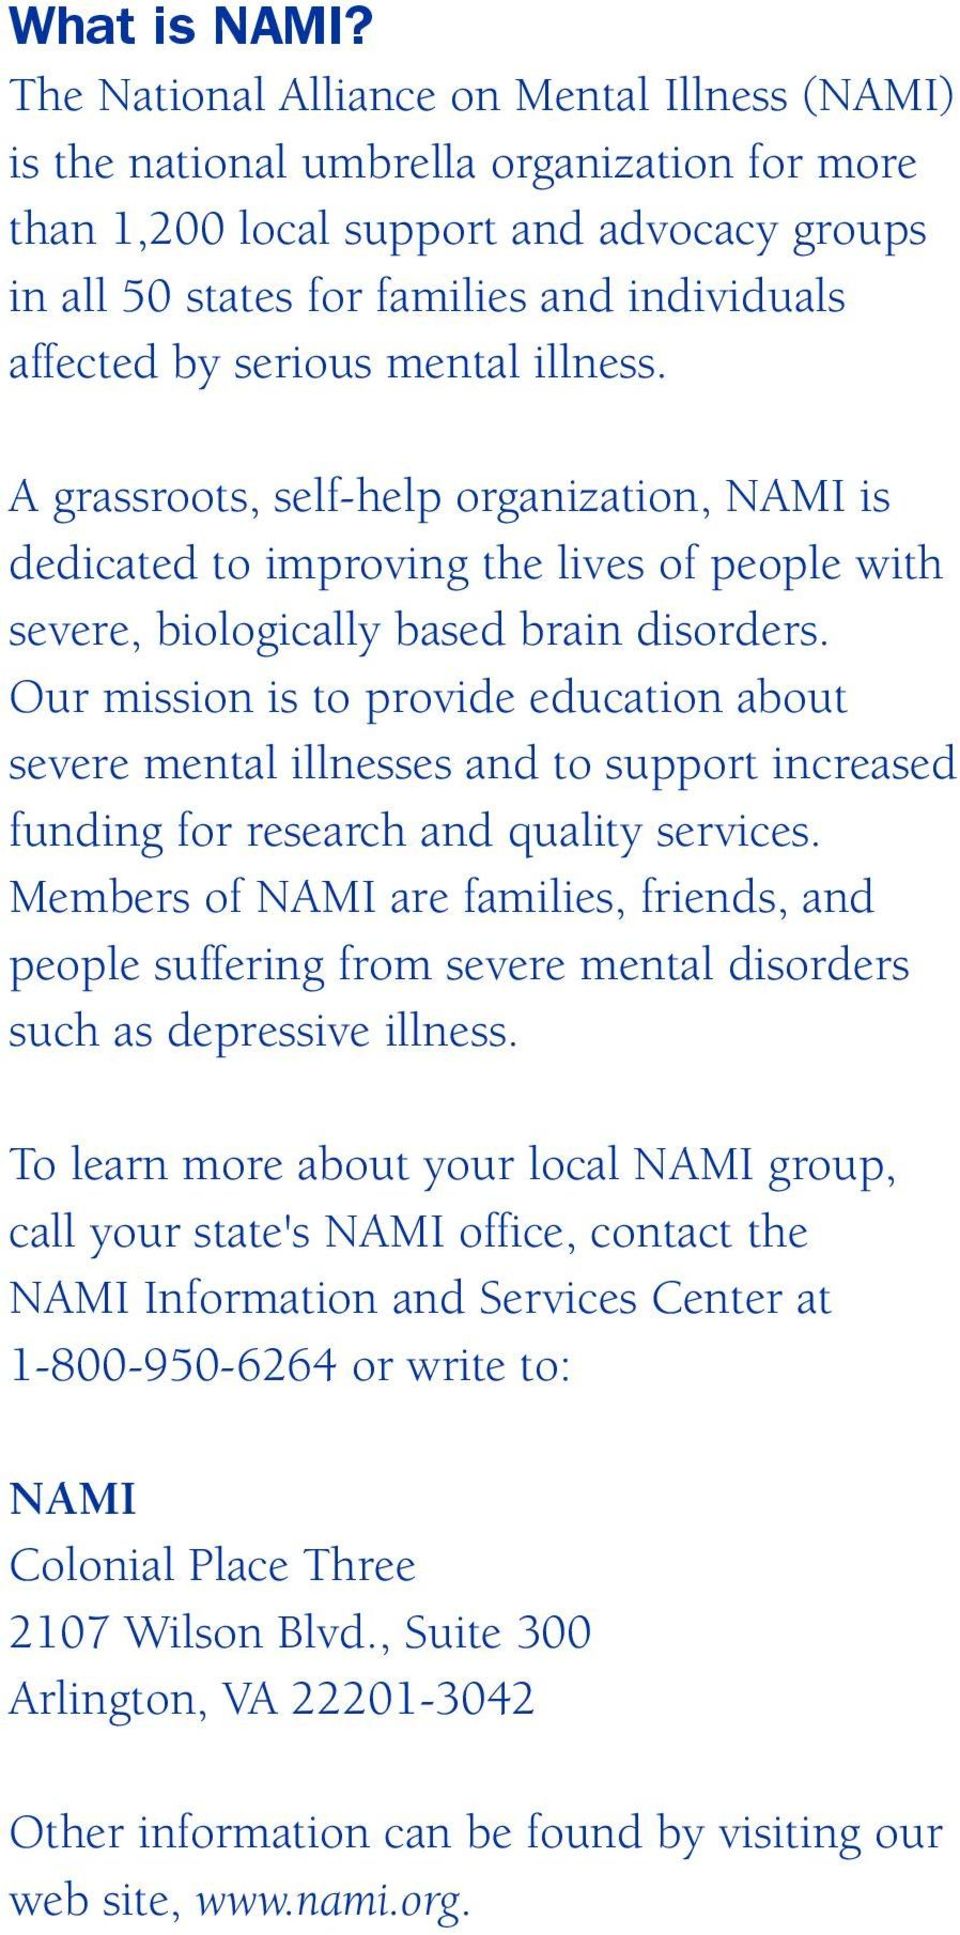 serious mental illness. A grassroots, self-help organization, NAMI is dedicated to improving the lives of people with severe, biologically based brain disorders.